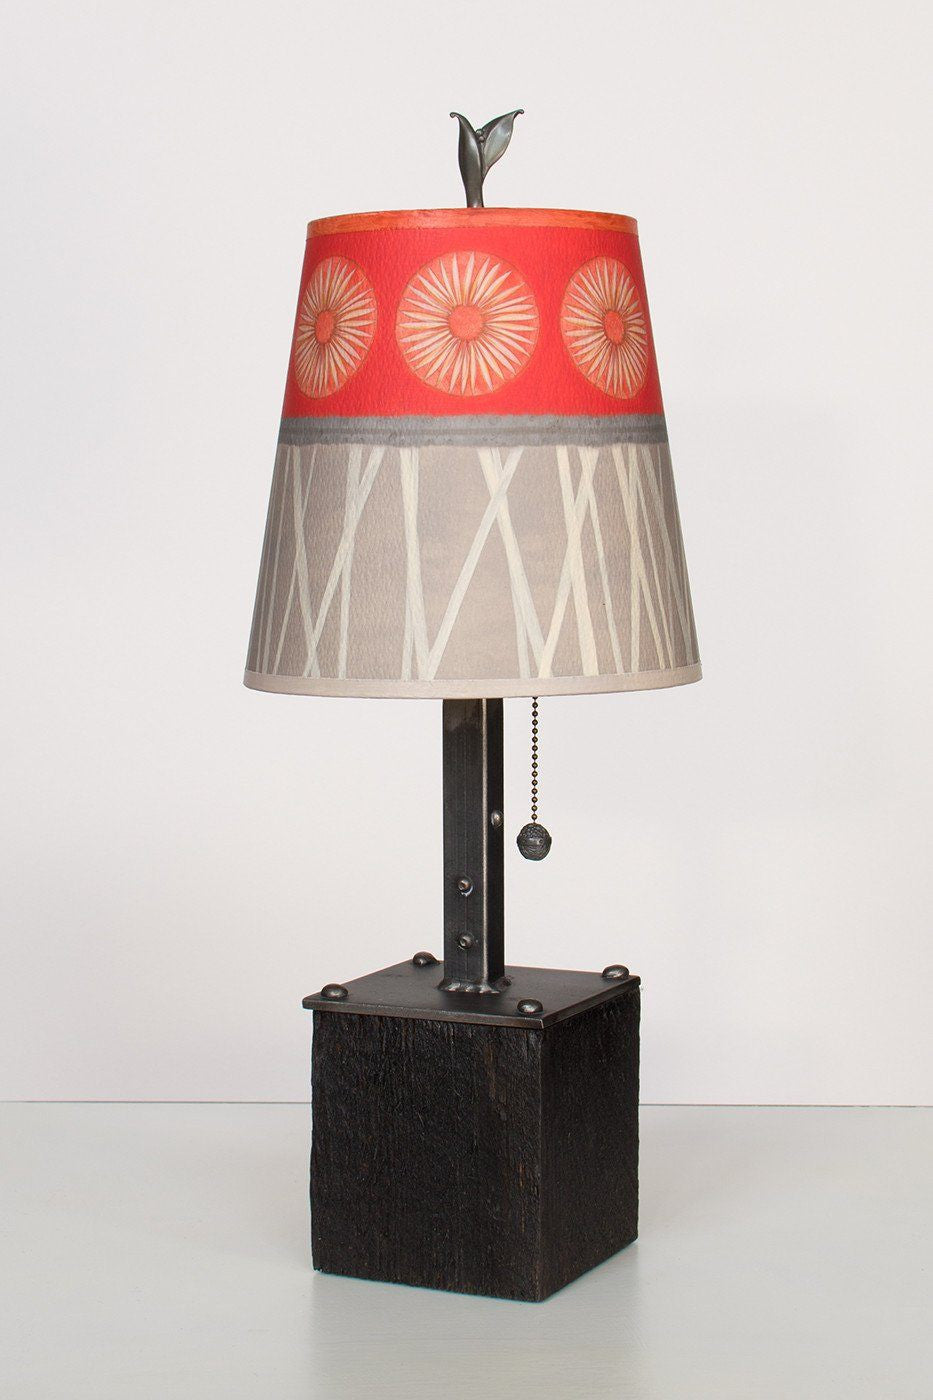 Steel Table Lamp on Reclaimed Wood with Small Drum Shade in Tang Lit